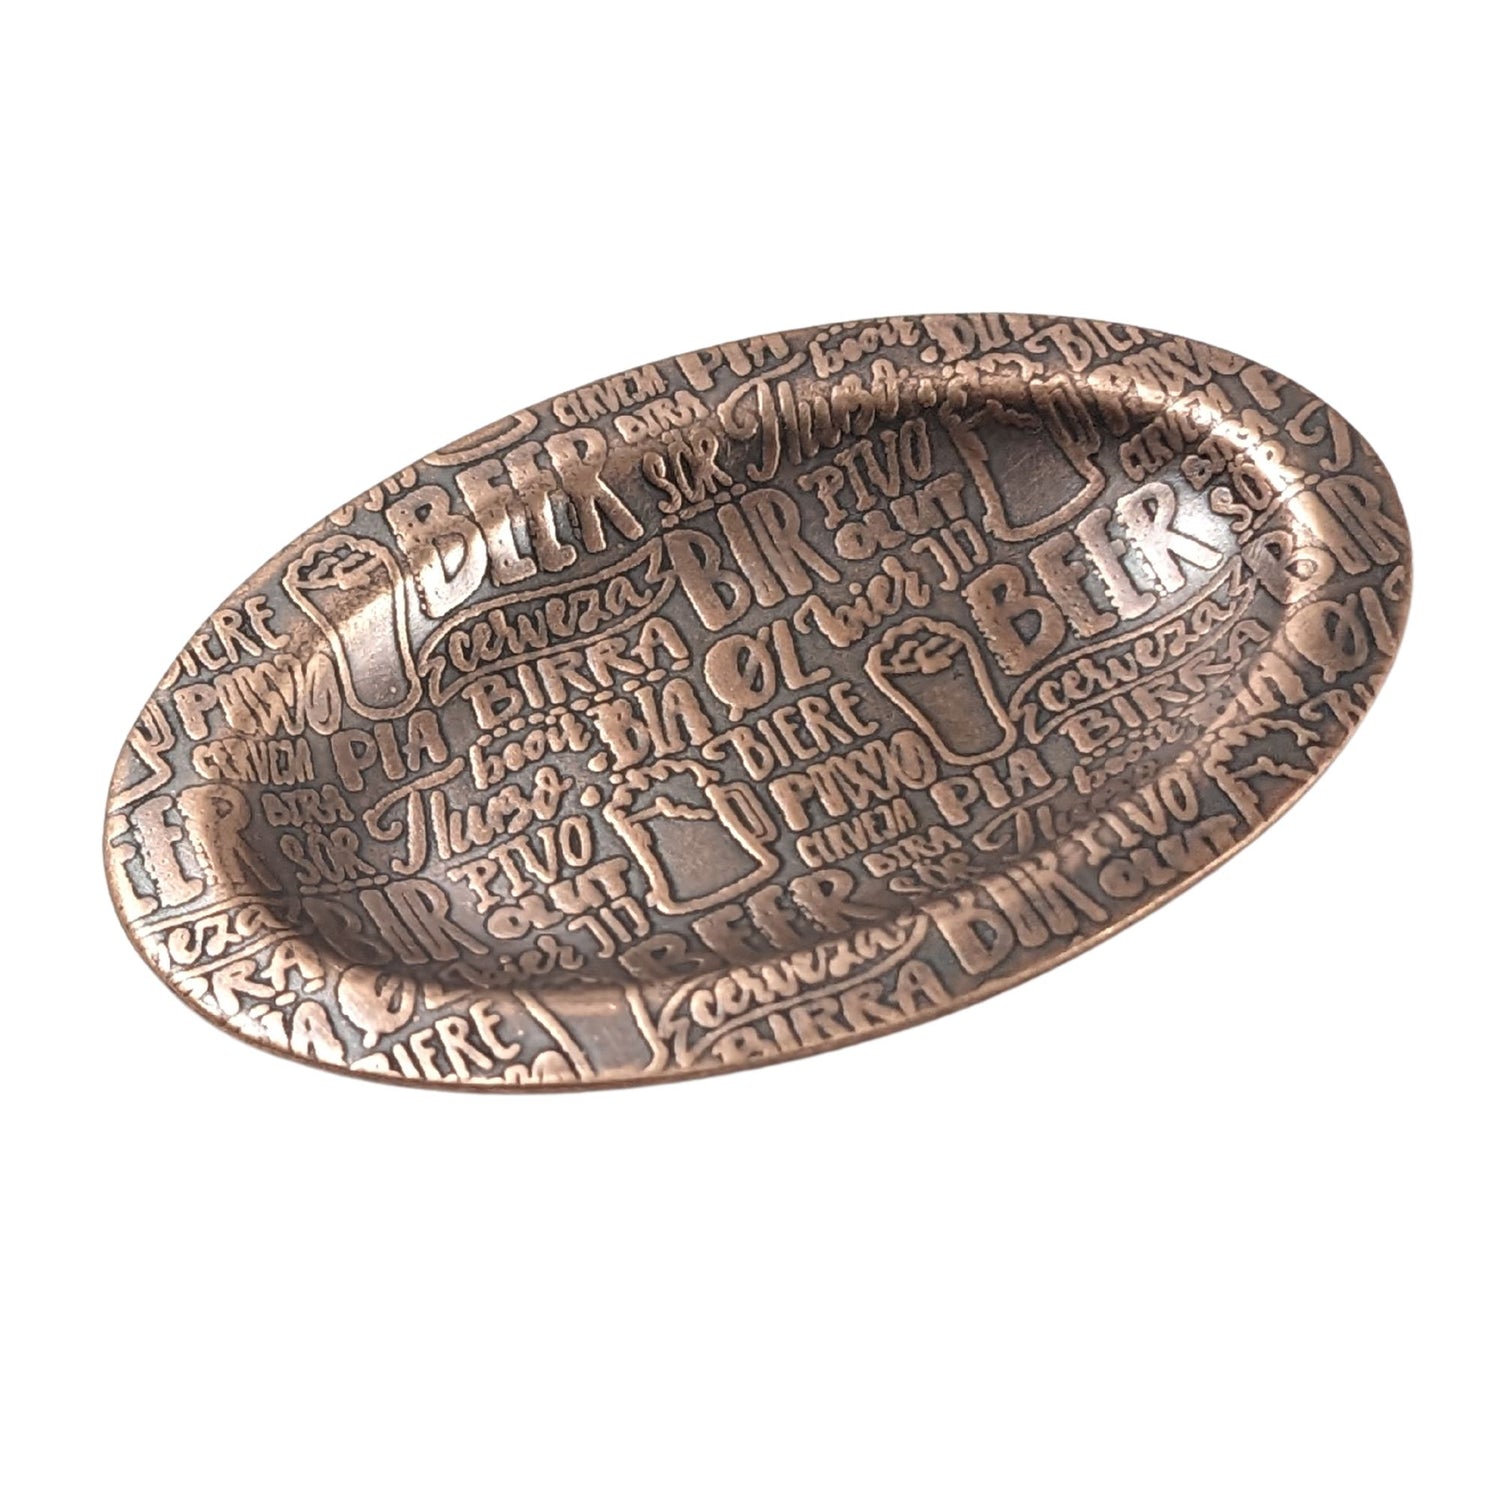 An oval copper ring dish with a raised edge. The dish has an impressed pattern made up of the word beer in many languages.